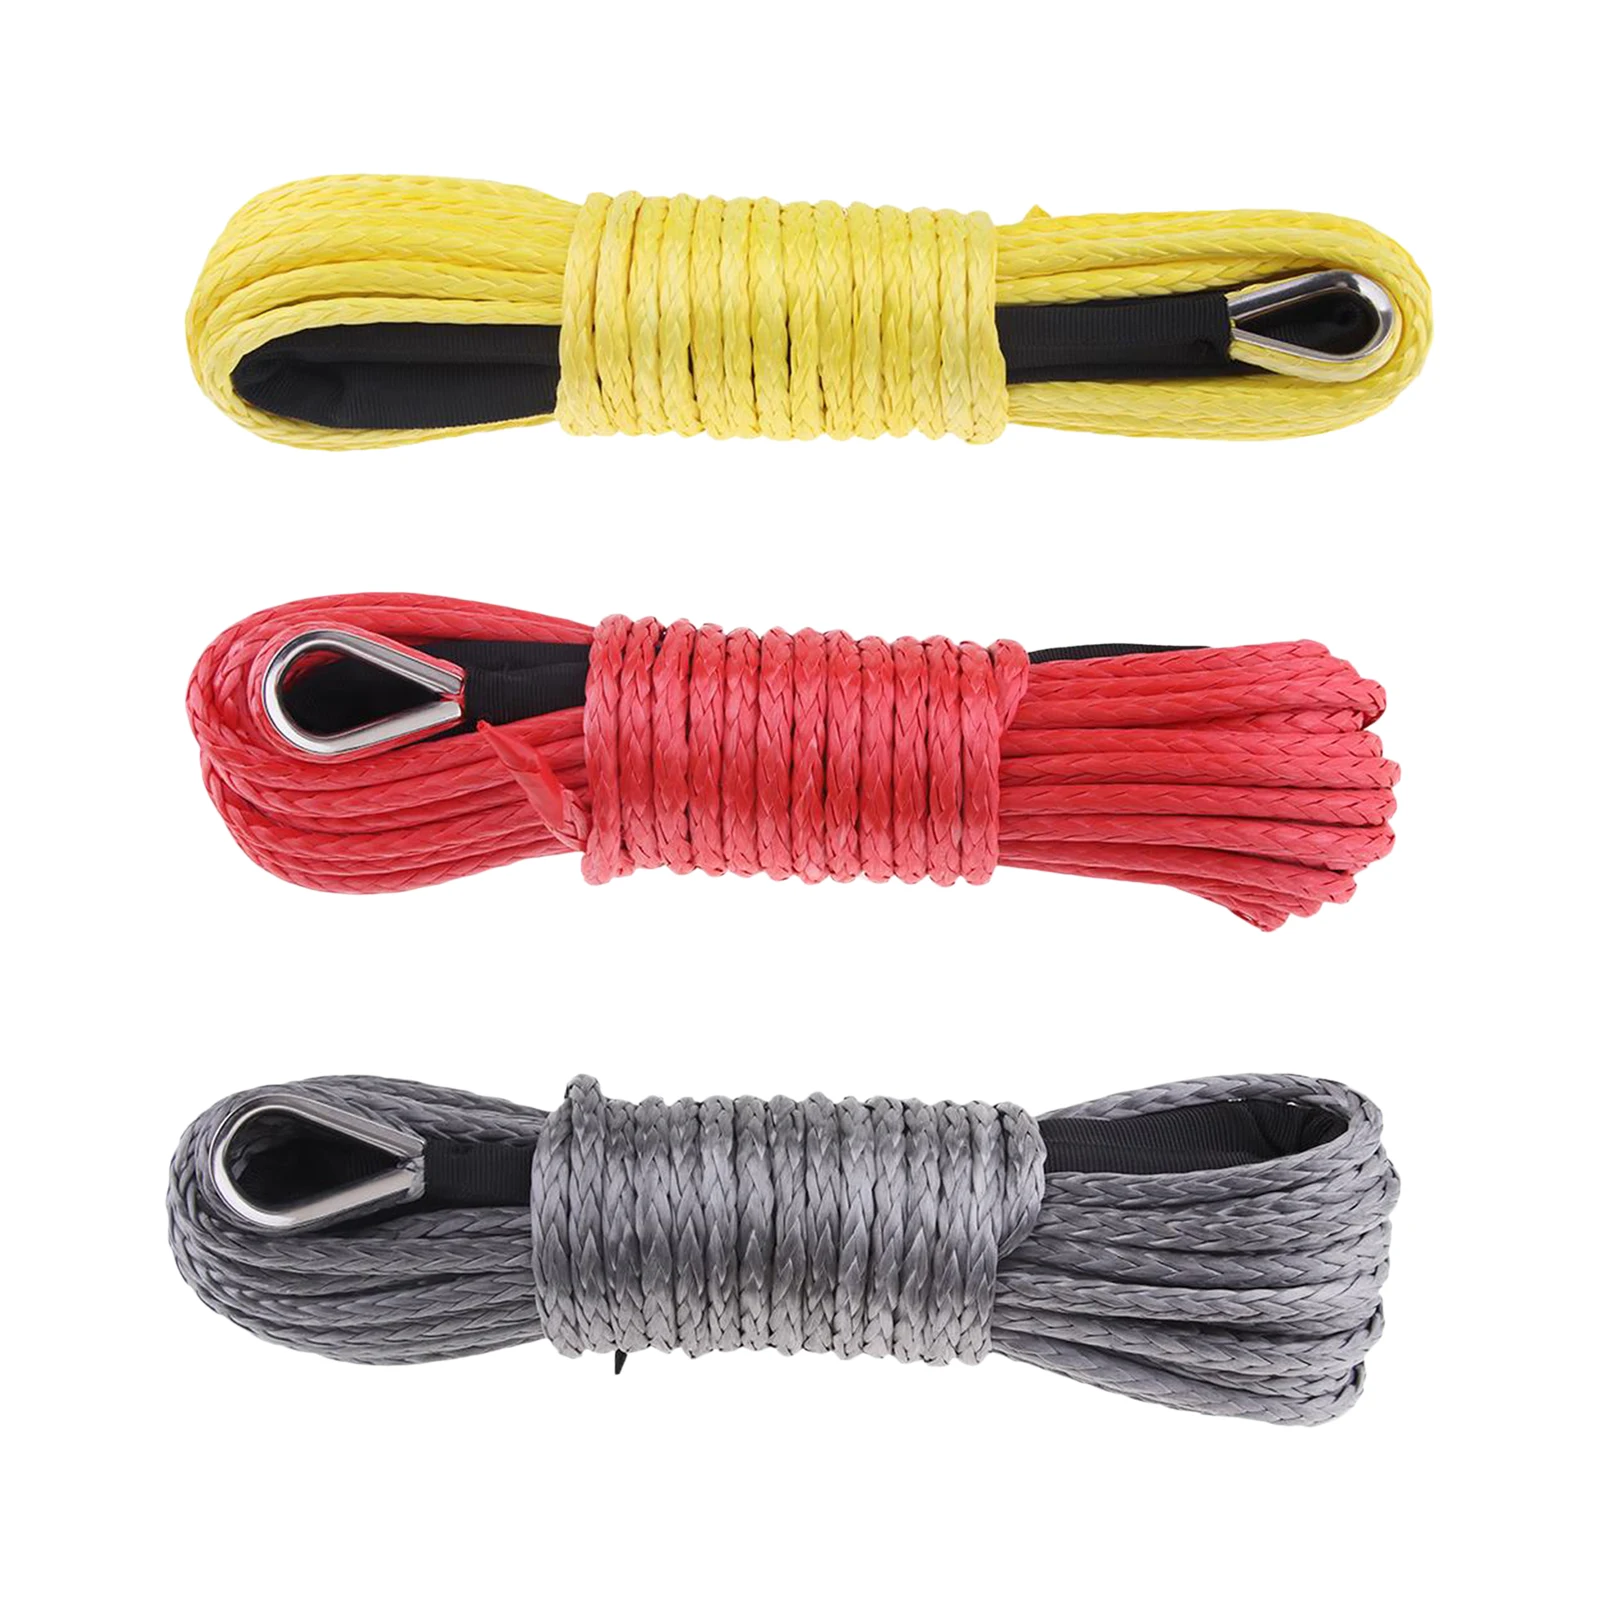 6mm x 15m Synthetic Fiber Winch Line Cable Rope for ATV UTV Boat Repairable